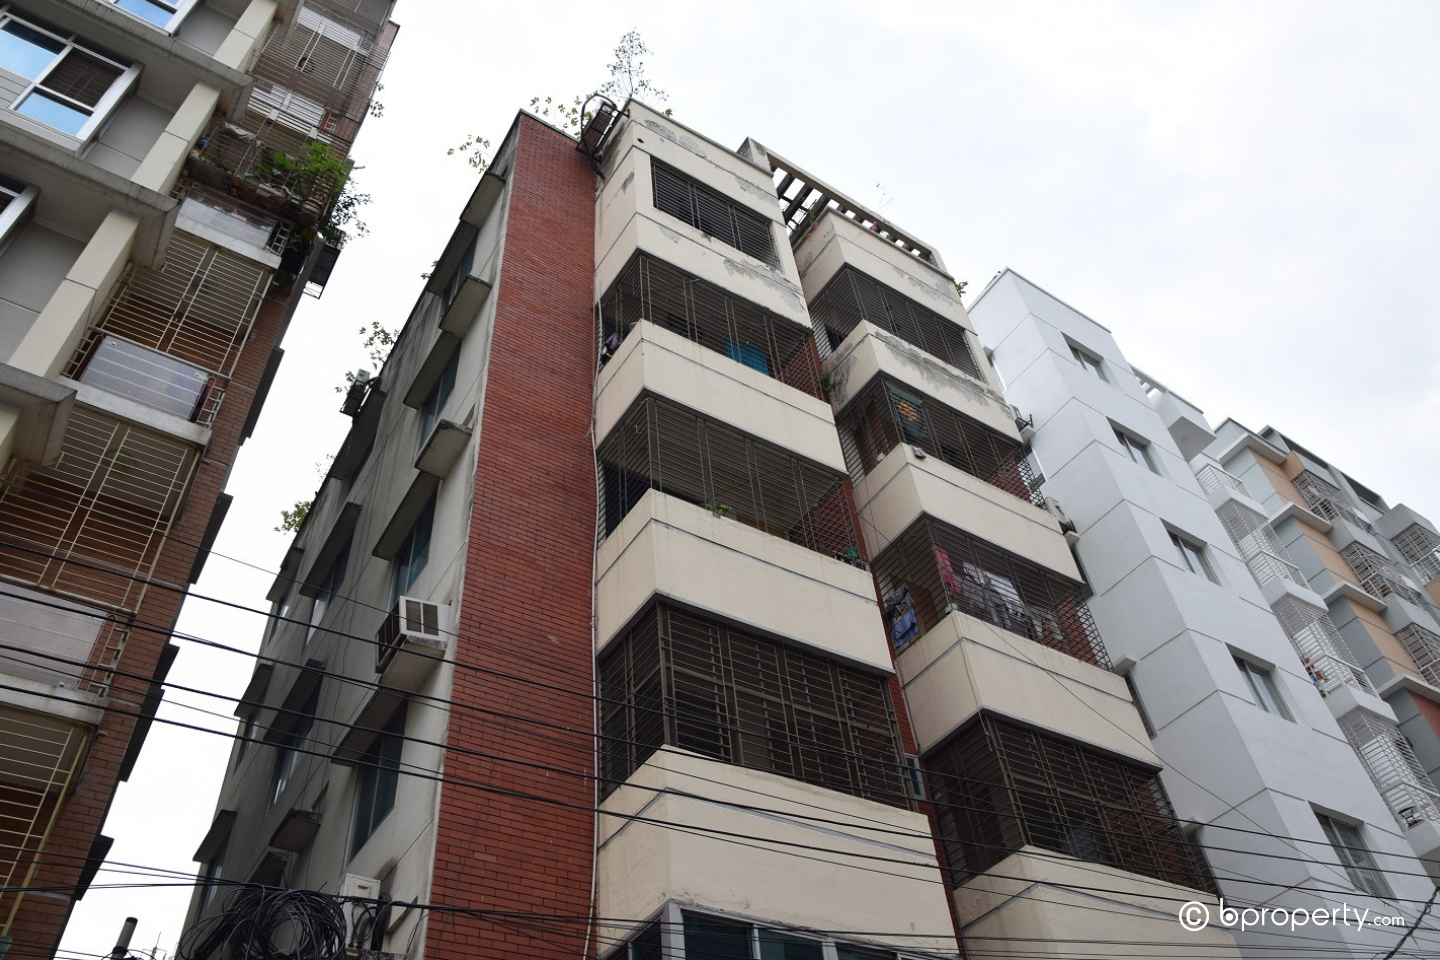 One of the finest properties for investment in Dhaka is available right now